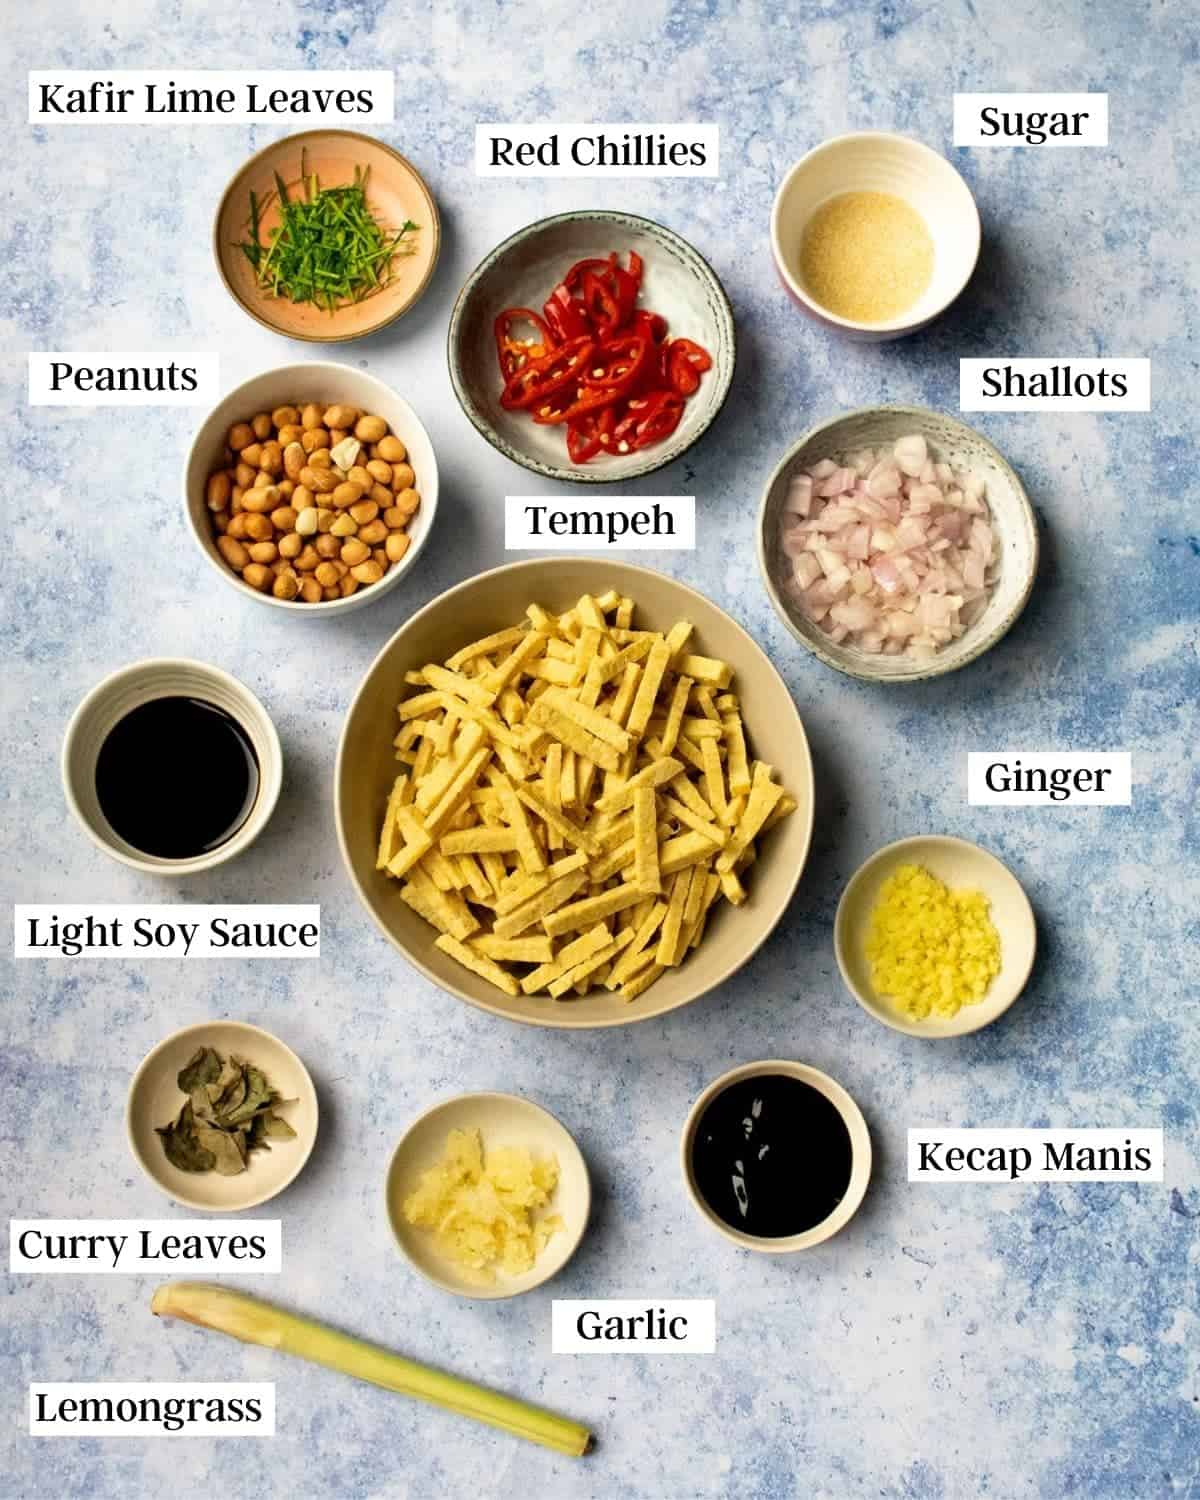 Ingredients in bowls, ready to be cooked.